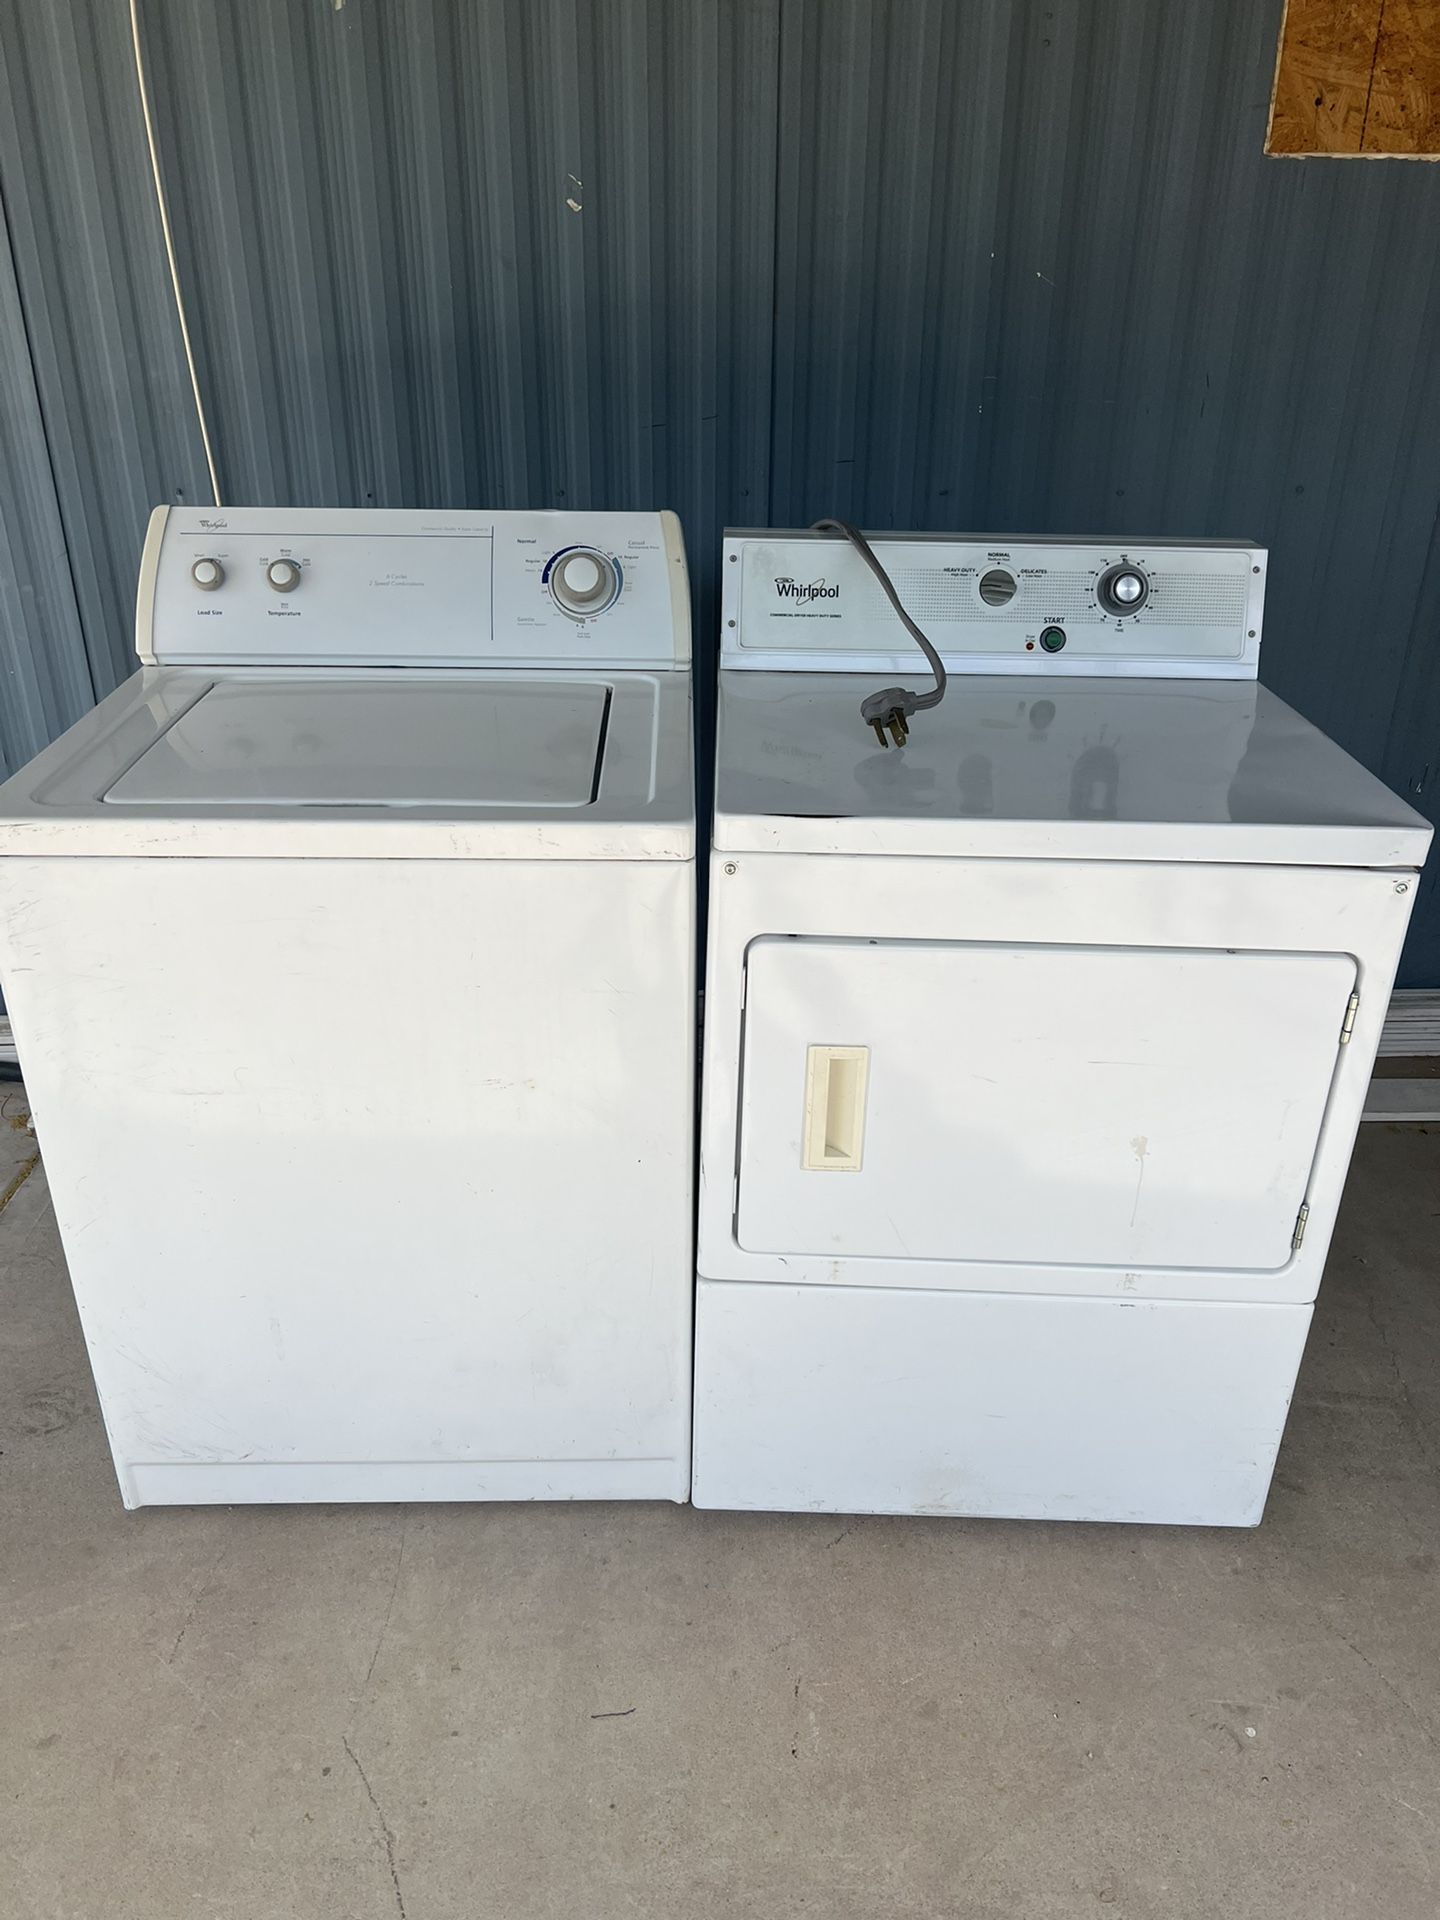 Whirlpool Washer And Dryer (electric)